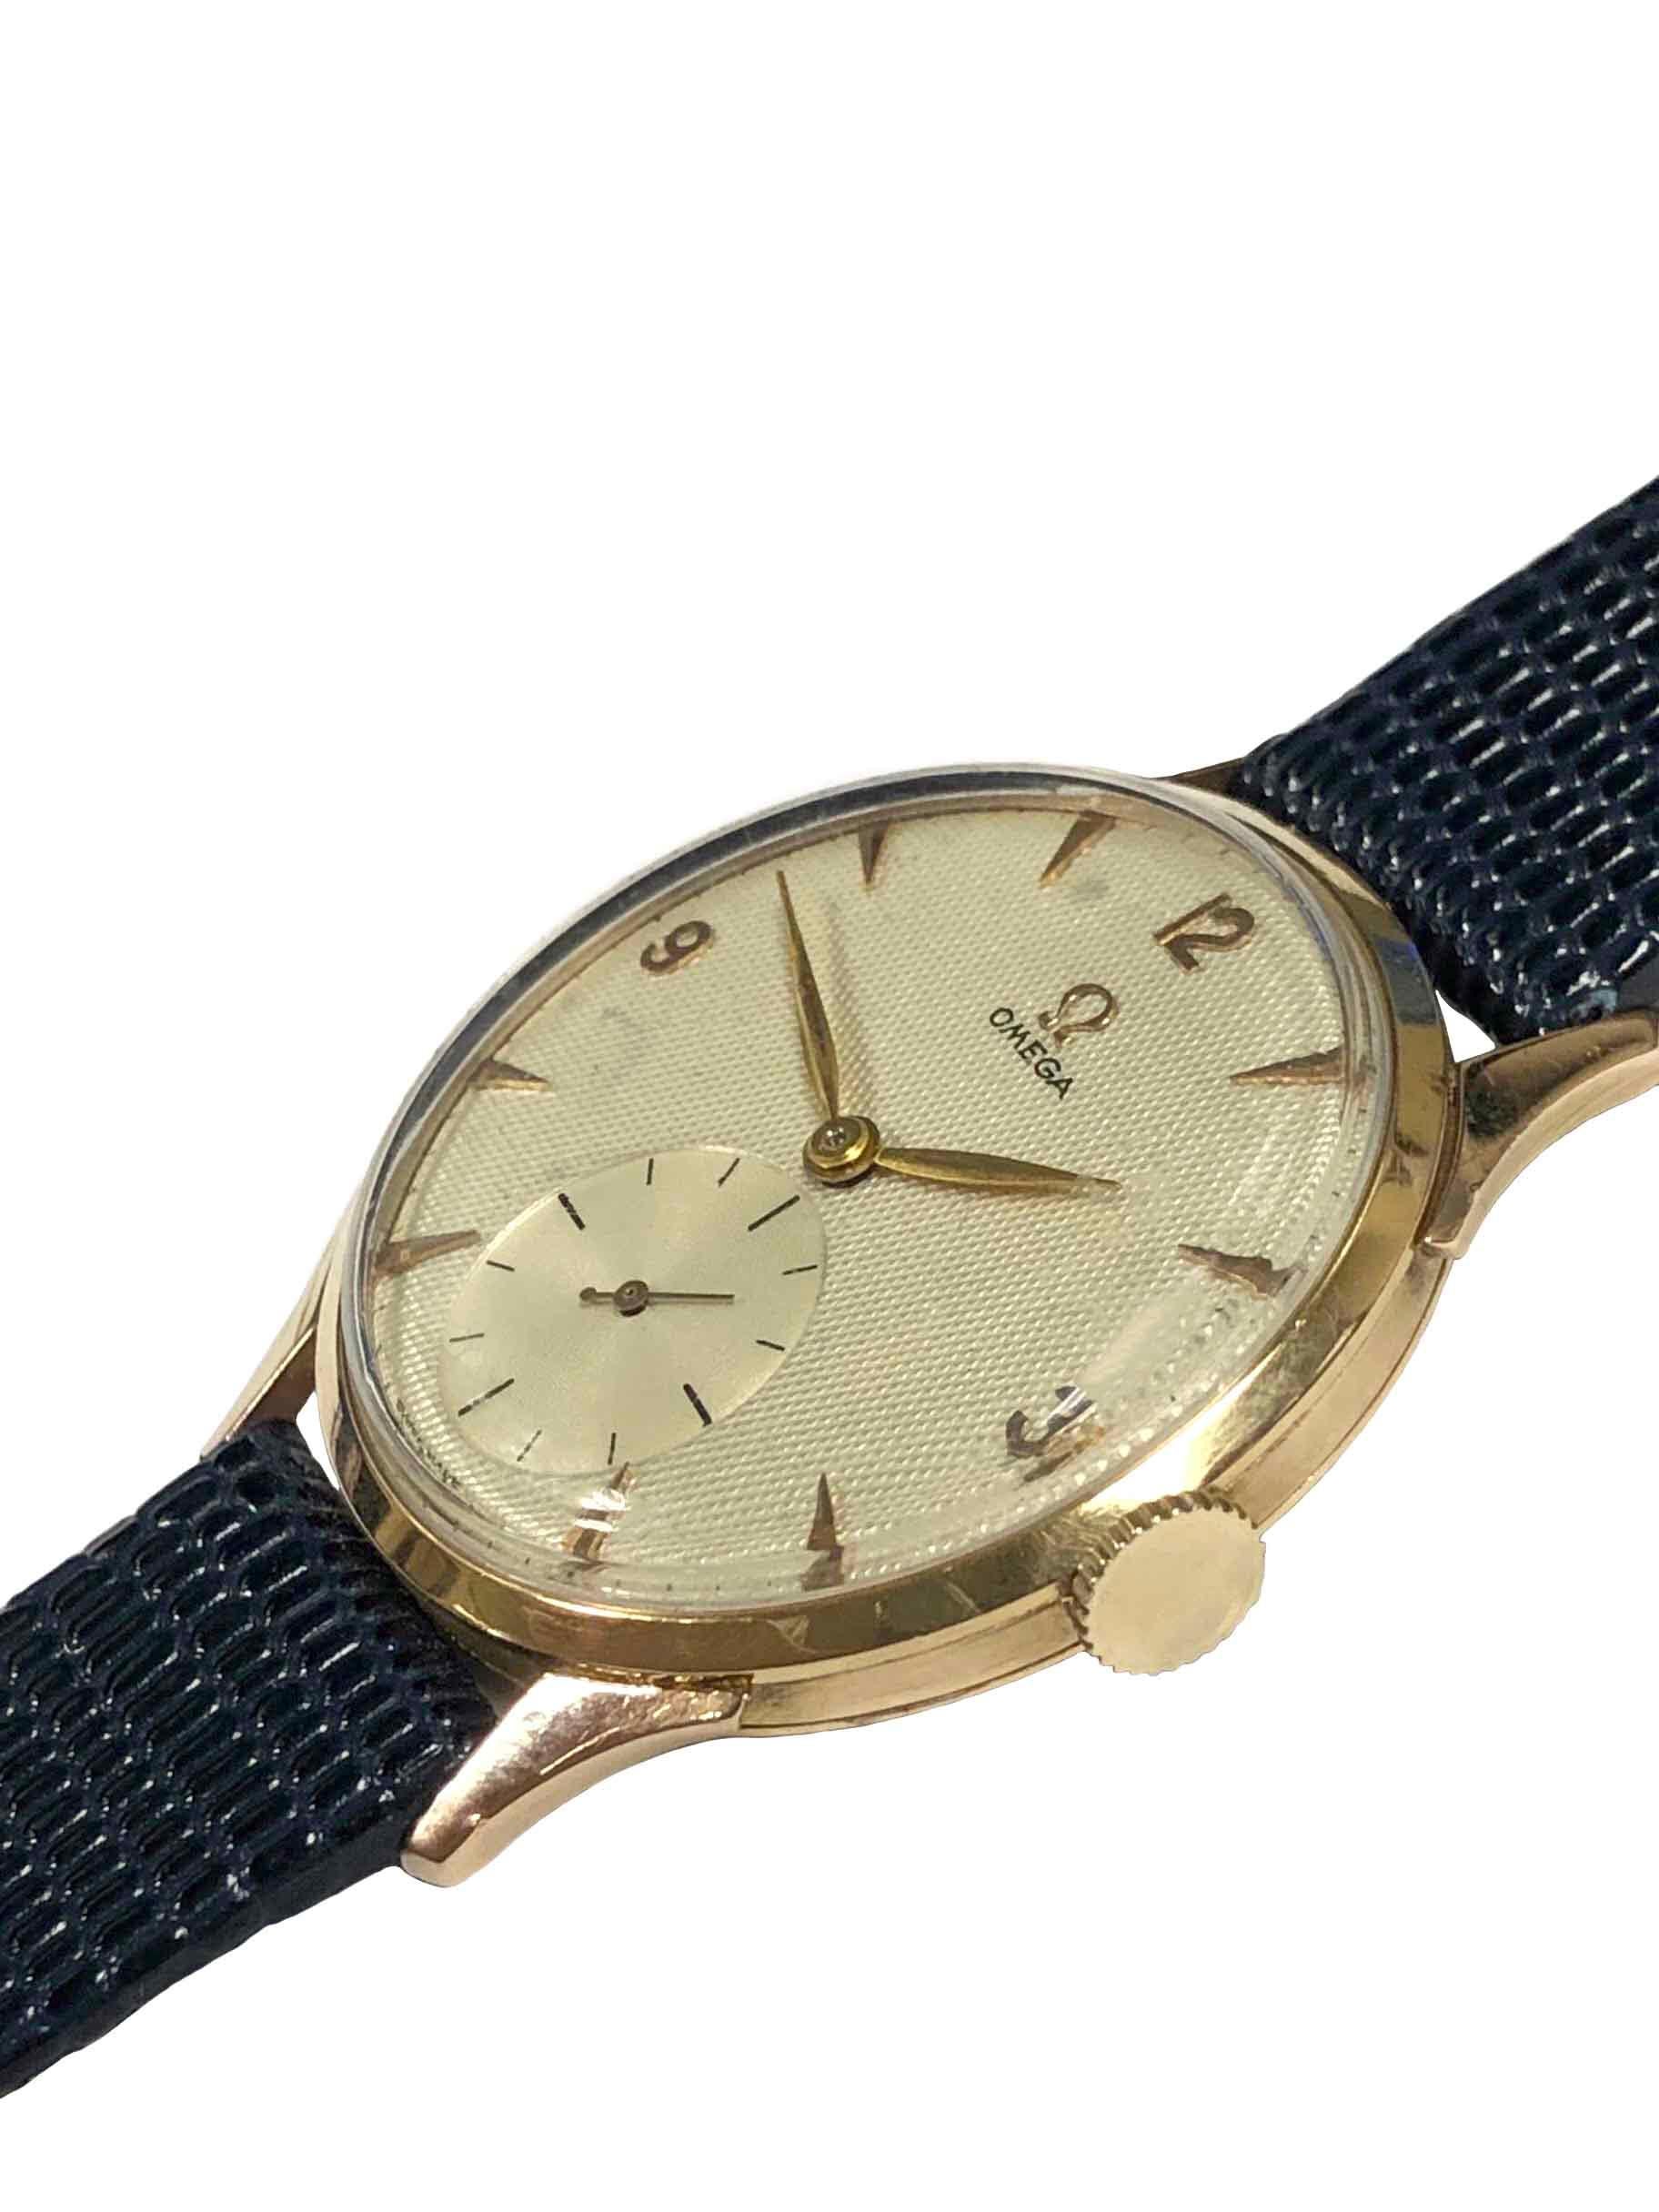 Circa 1940s Omega Wrist Watch, 36 M.M. 3 Piece 18K Rose Gold Case with curved Lugs for the South American market. 17 Jewel, mechanical, manual wind movement. Professionally restored Silver Satin Waffle textured dial with raised Markers and an Engine